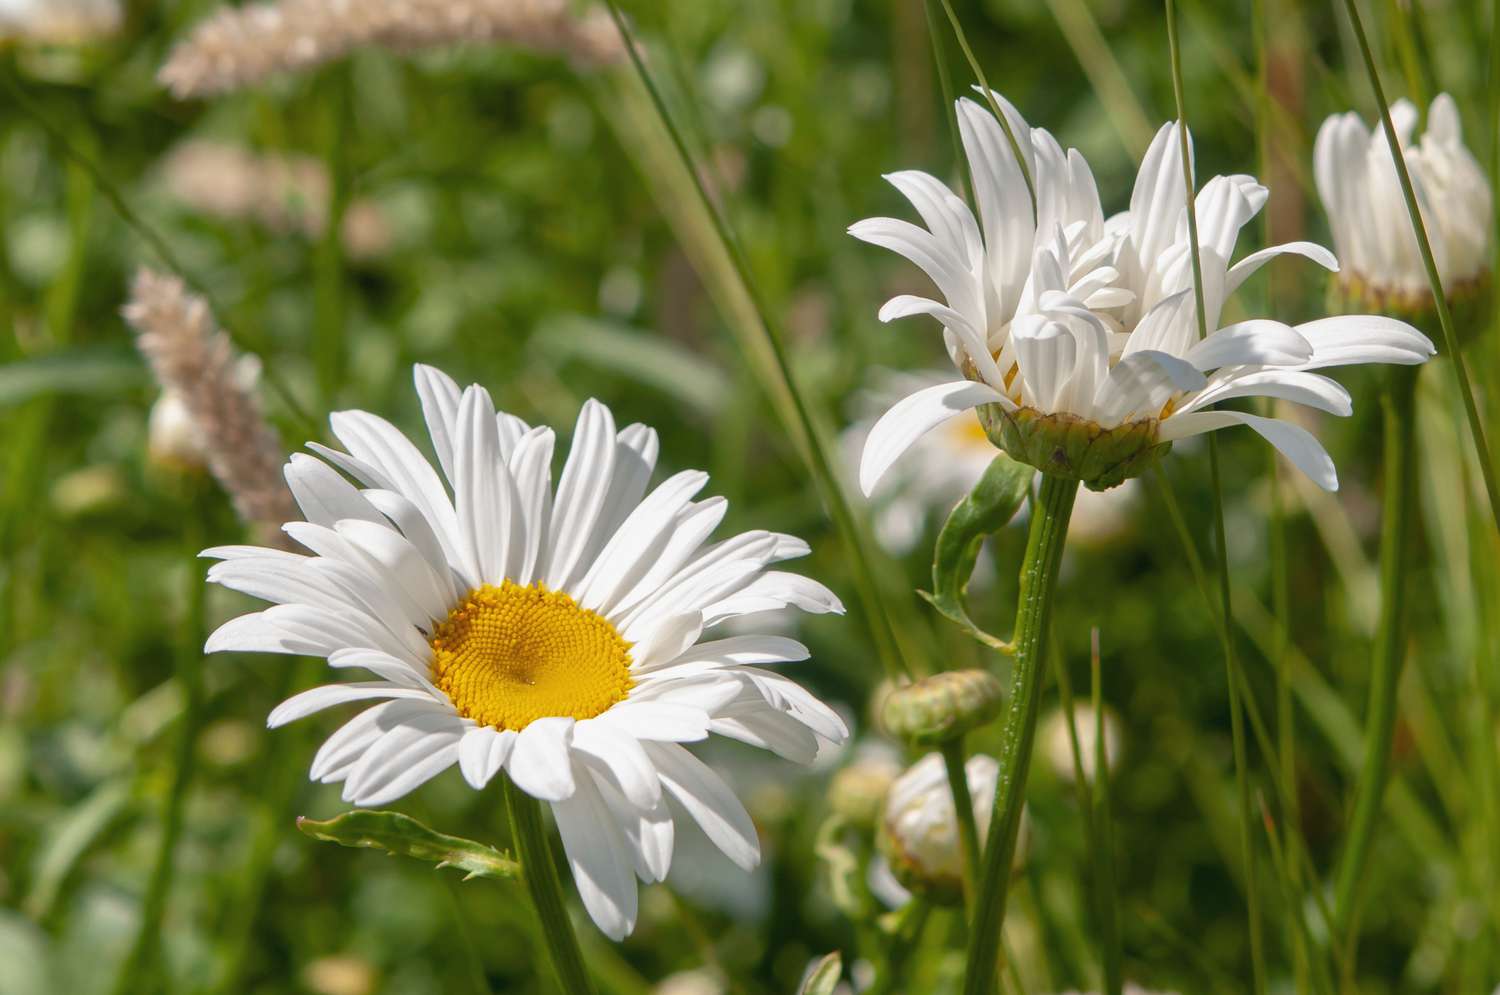 Shasta daisies with white flowers in sunlight closeup